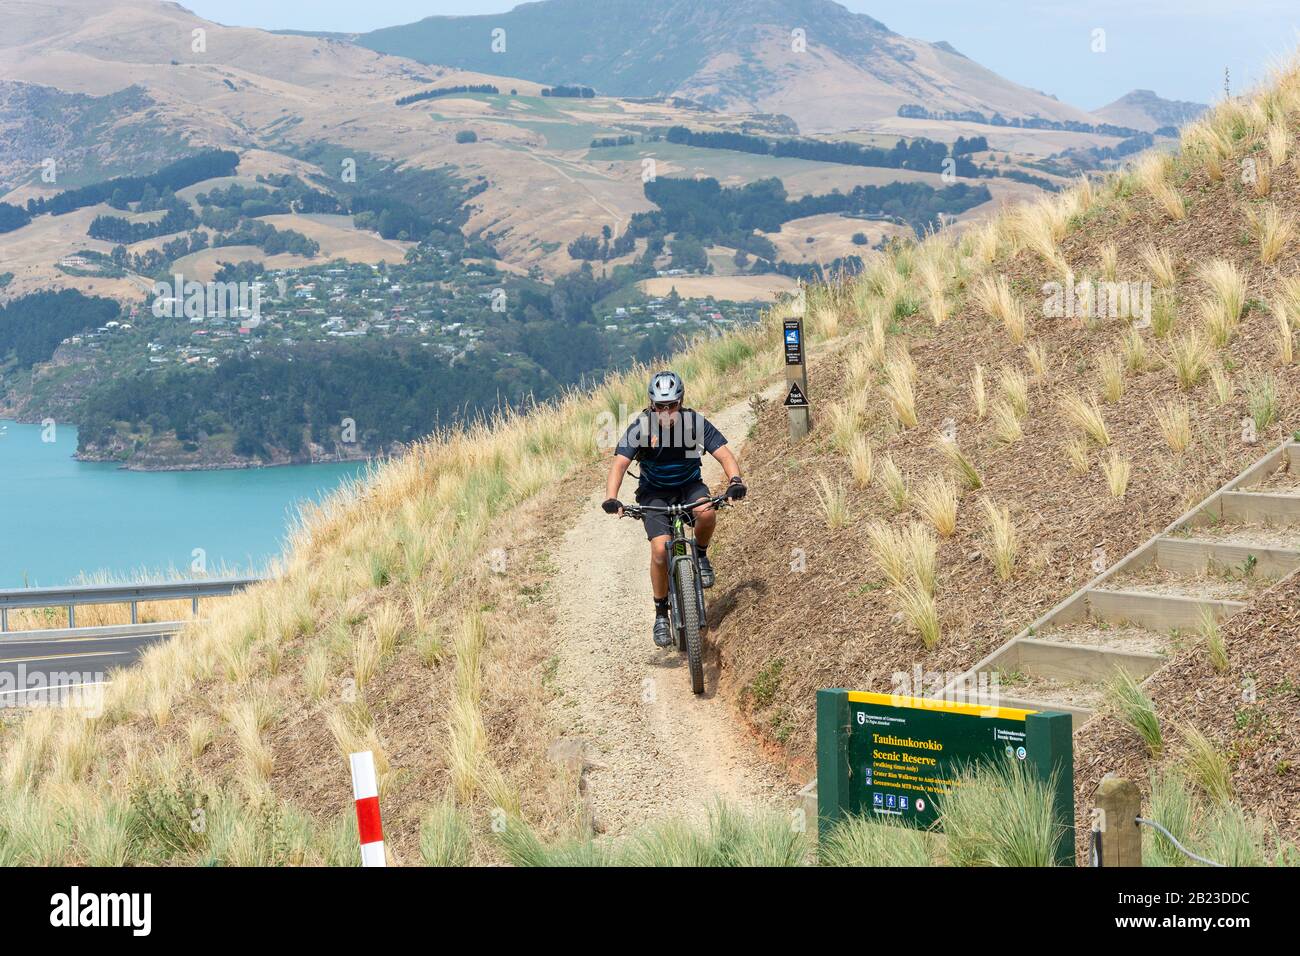 Cyclist on Greenwood Track in Tauhinukorokio Scenic Reserve at Top of Summits Road, Sumner, Christchurch, Canterbury, New Zealand Stock Photo